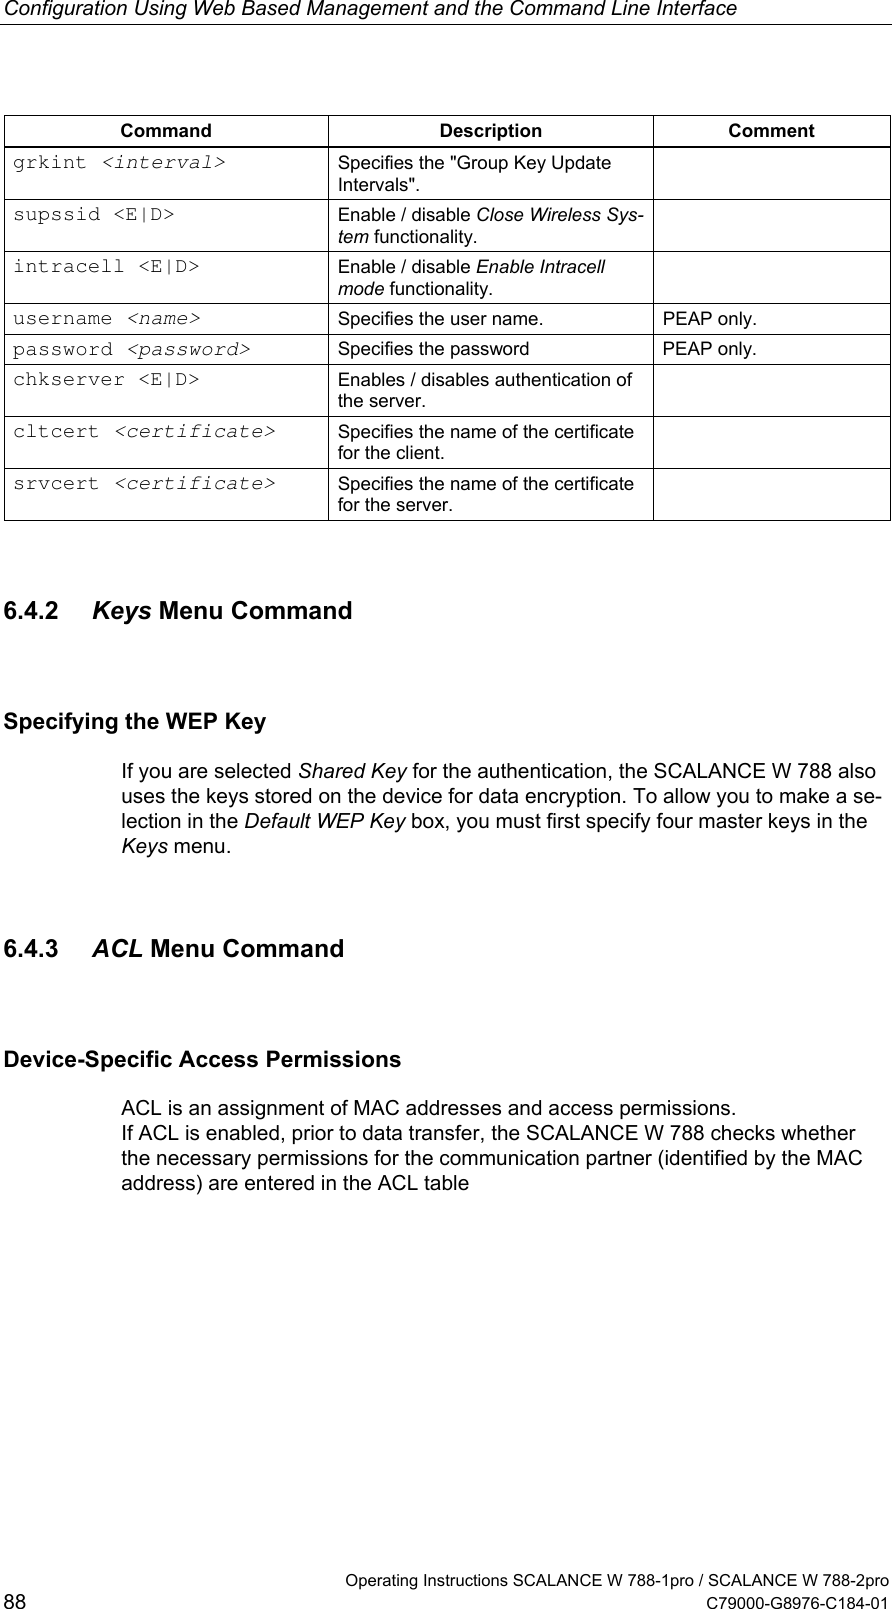 Configuration Using Web Based Management and the Command Line Interface Command Description Comment grkint &lt;interval&gt; Specifies the &quot;Group Key Update Intervals&quot;.  supssid &lt;E|D&gt;  Enable / disable Close Wireless Sys-tem functionality.  intracell &lt;E|D&gt;  Enable / disable Enable Intracell mode functionality.  username &lt;name&gt; Specifies the user name.  PEAP only. password &lt;password&gt; Specifies the password  PEAP only. chkserver &lt;E|D&gt;  Enables / disables authentication of the server.  cltcert &lt;certificate&gt; Specifies the name of the certificate for the client.  srvcert &lt;certificate&gt; Specifies the name of the certificate for the server.  6.4.2  Keys Menu Command Specifying the WEP Key If you are selected Shared Key for the authentication, the SCALANCE W 788 also uses the keys stored on the device for data encryption. To allow you to make a se-lection in the Default WEP Key box, you must first specify four master keys in the Keys menu. 6.4.3  ACL Menu Command Device-Specific Access Permissions ACL is an assignment of MAC addresses and access permissions.  If ACL is enabled, prior to data transfer, the SCALANCE W 788 checks whether the necessary permissions for the communication partner (identified by the MAC address) are entered in the ACL table   Operating Instructions SCALANCE W 788-1pro / SCALANCE W 788-2pro 88  C79000-G8976-C184-01 